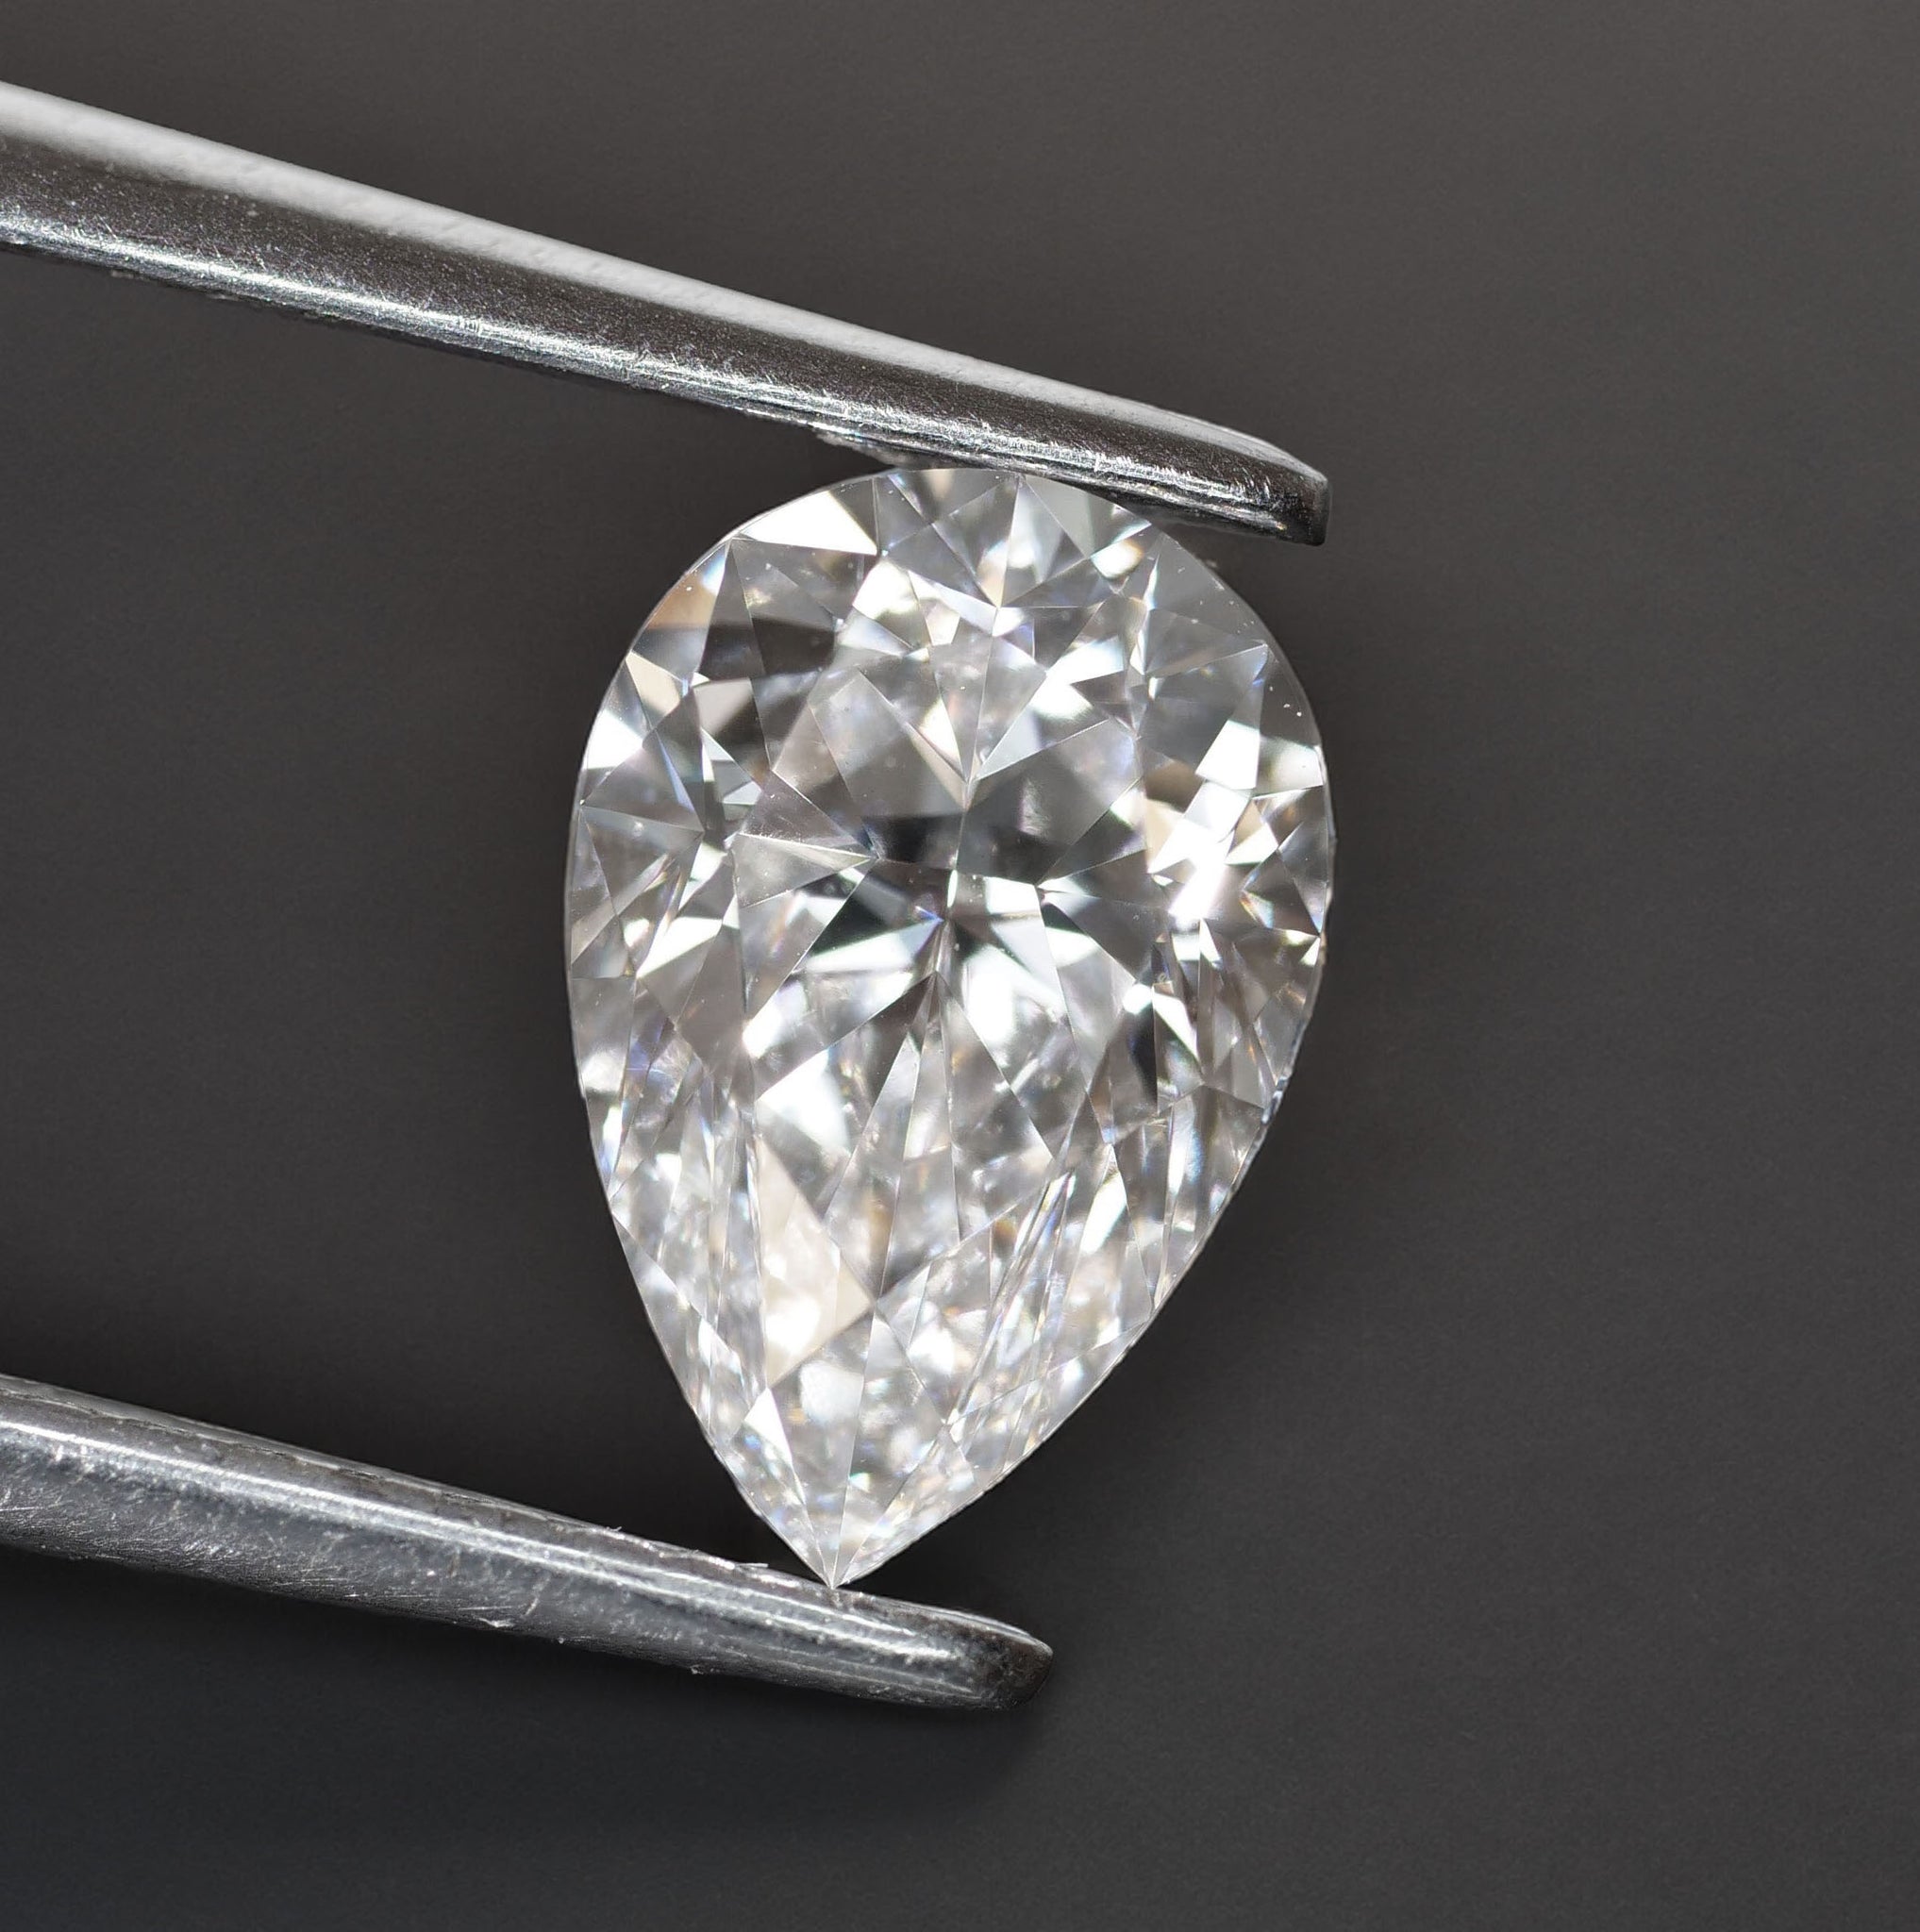 Natural diamond | GIA certified, pear cut 8x5 mm, H color, VS, 0.8ct - Eden Garden Jewelry™